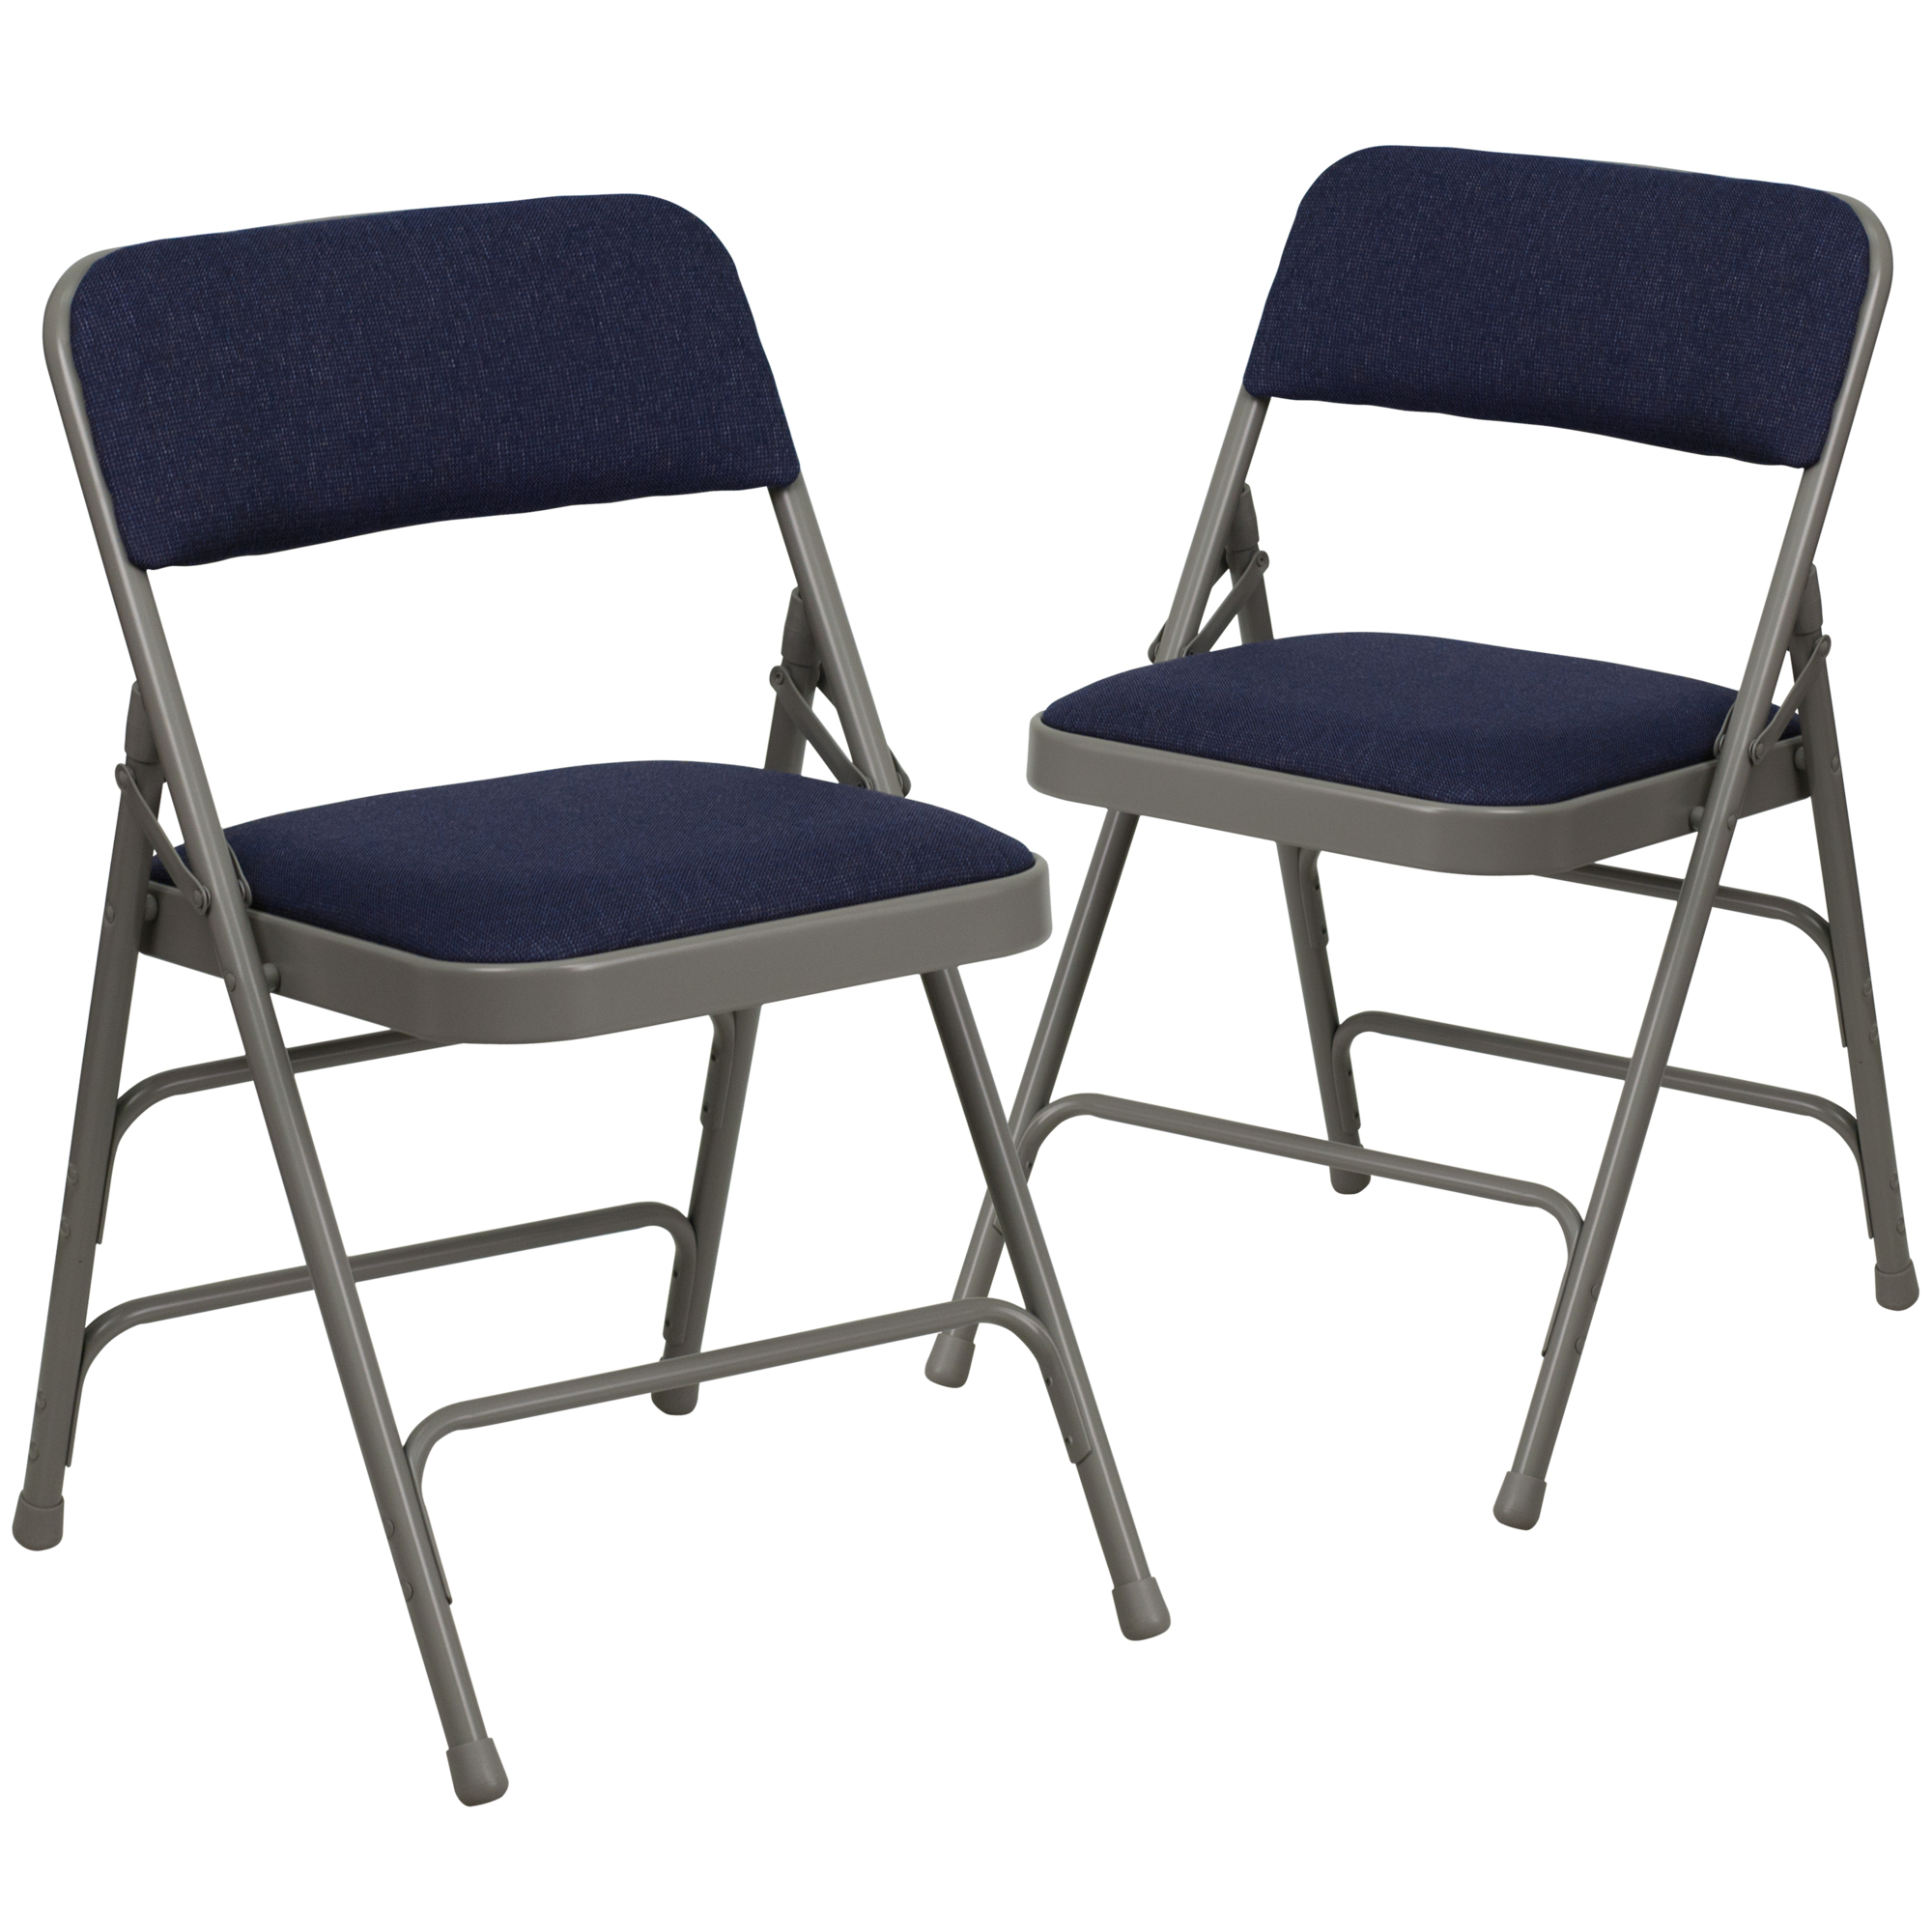 Flash Furniture, 2PK Triple Braced Navy Fabric Metal Folding Chair, Primary Color Blue, Included (qty.) 2, Model 2HAMC309AFNVY